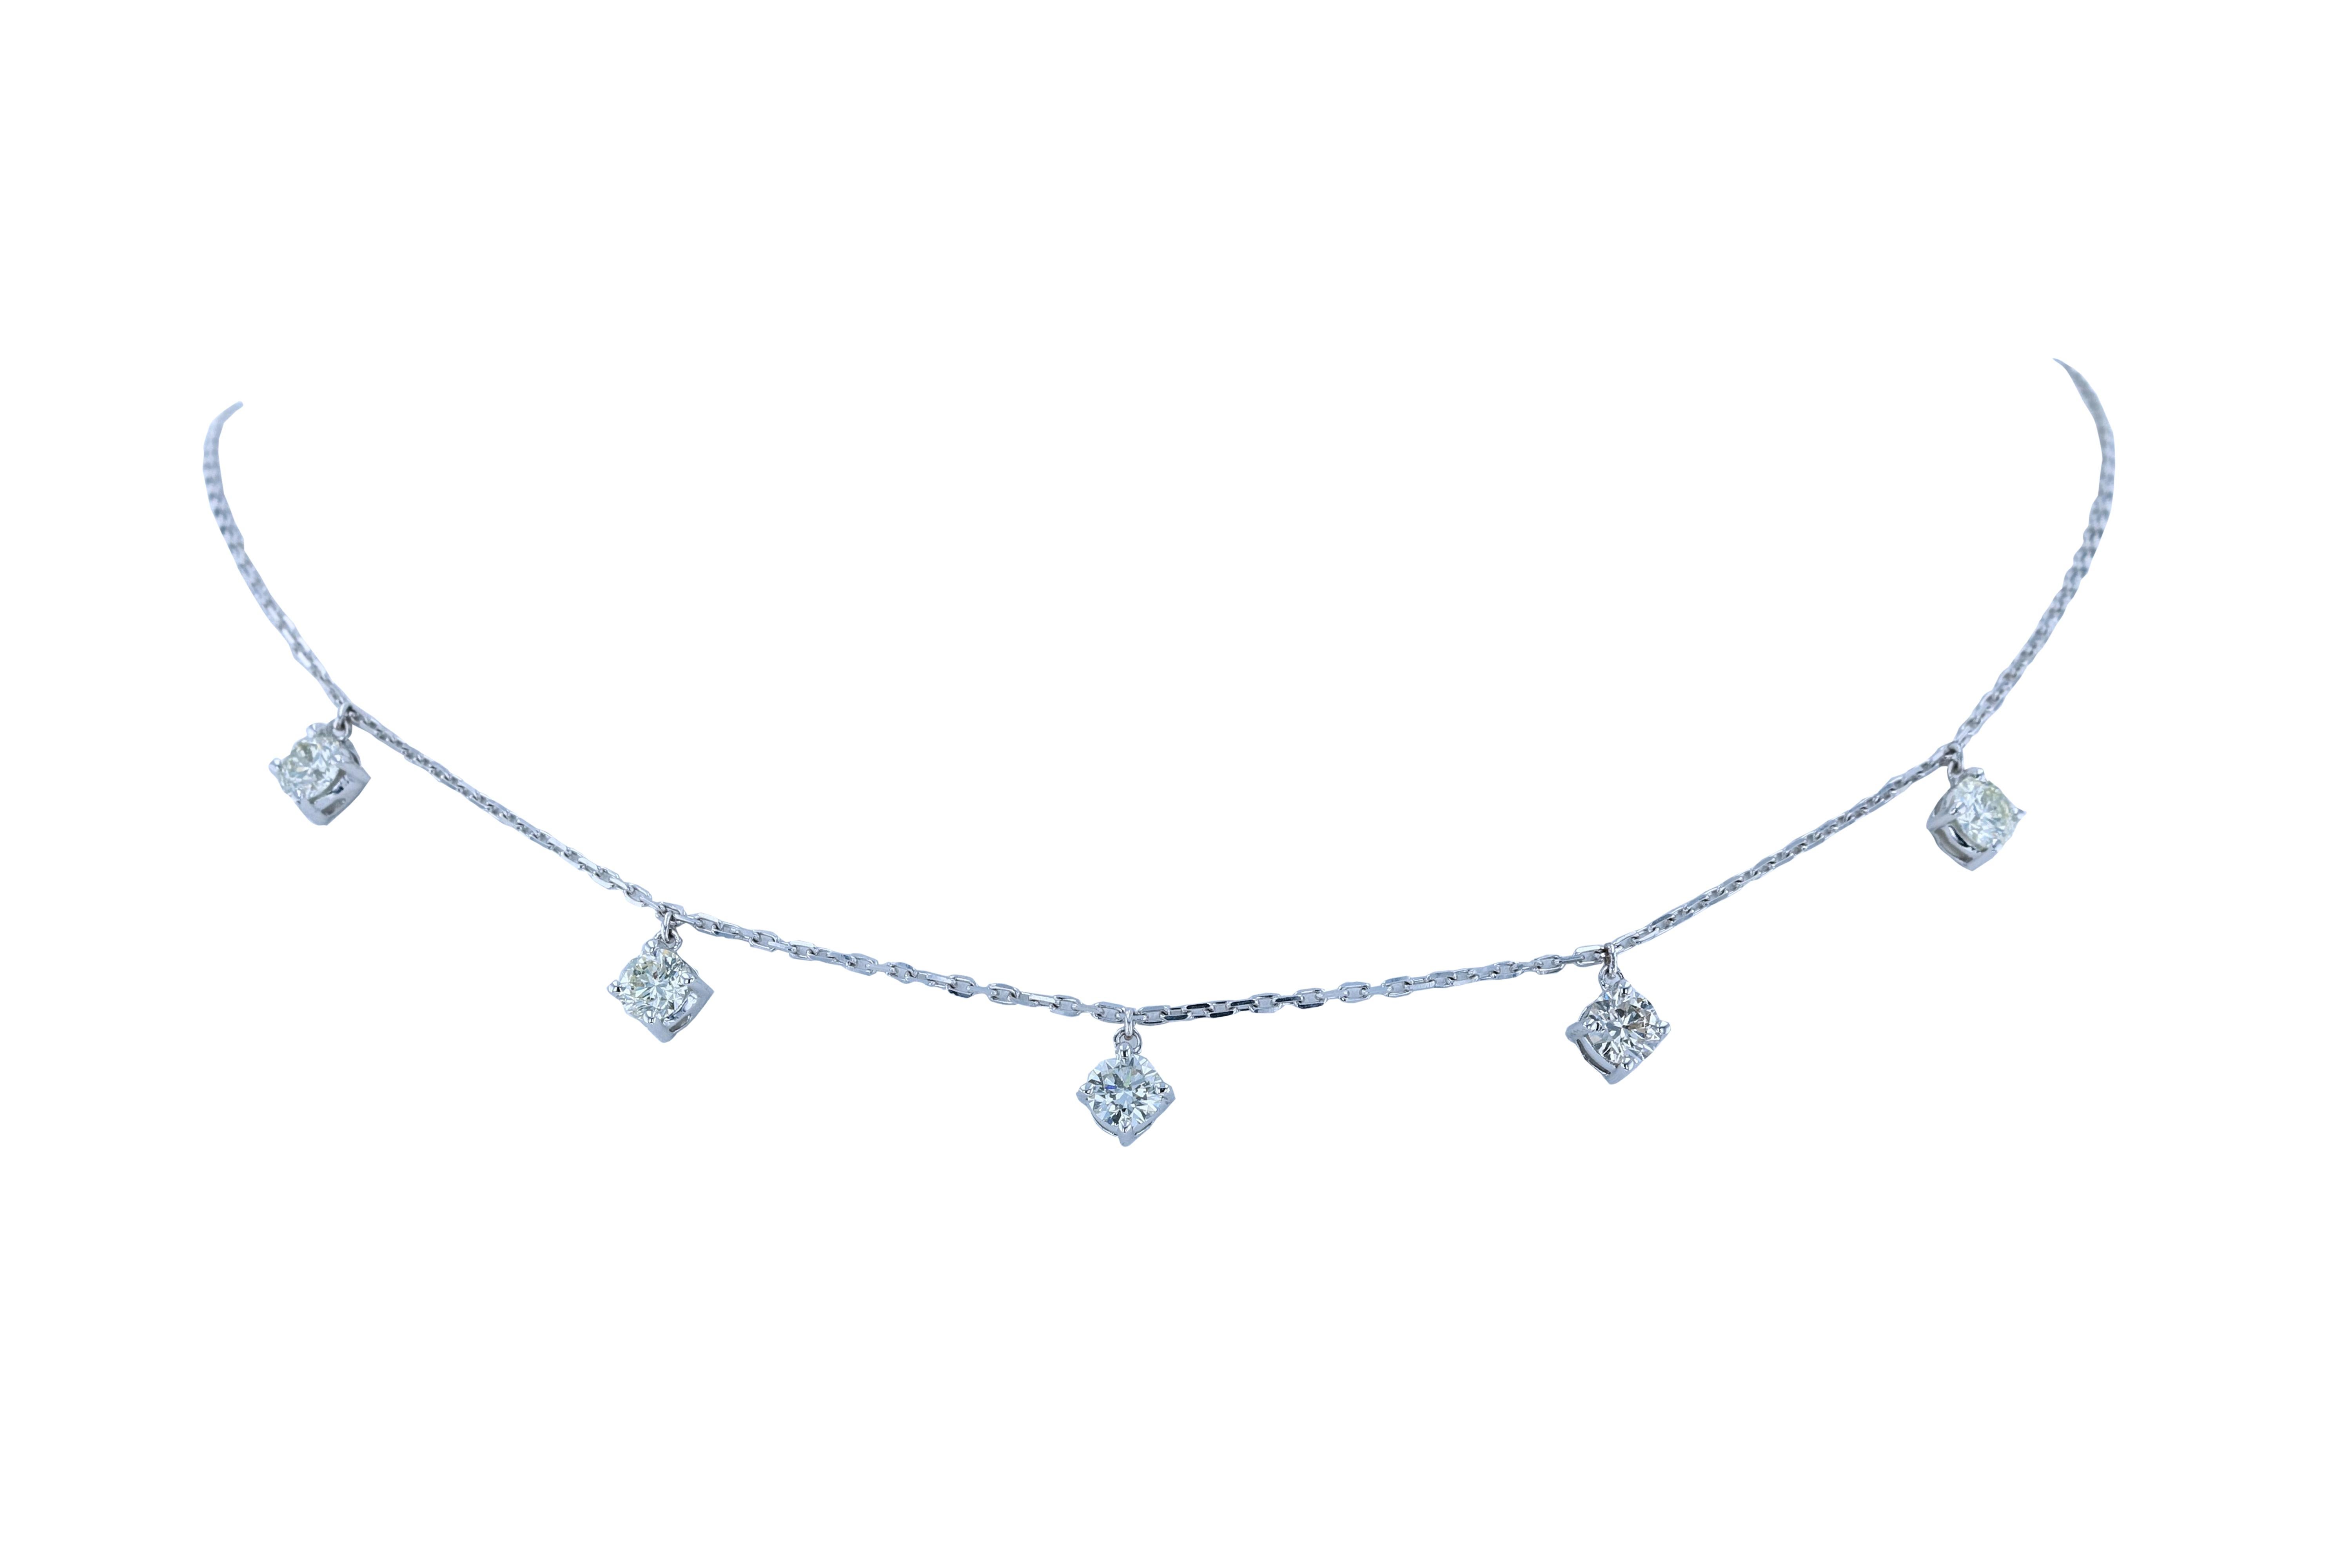 This amazing 18 K white gold choker necklace is designed for the minimalists who do not prefer heavy jewelry. With feminine and elegant touch it would be a perfect standout addition to your collection.
Diamond clarity: VS SI / G H color
Diamond